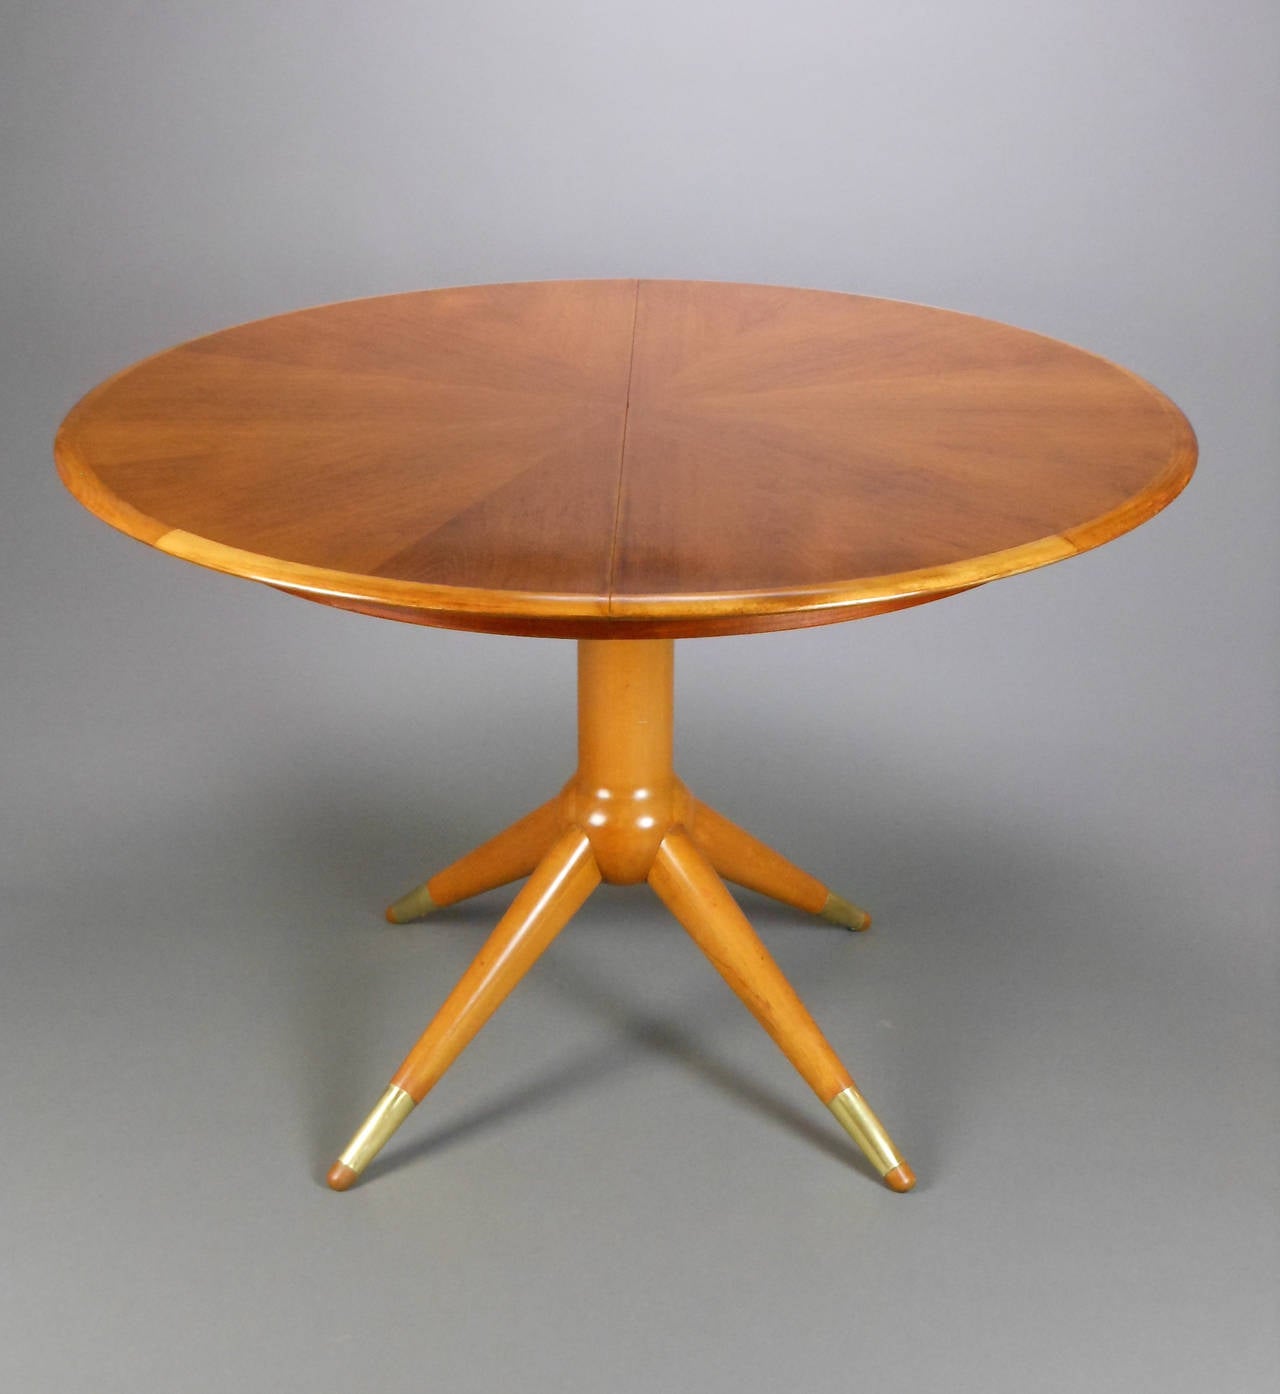 The circular top extending to an oval with all three leaves, the center sputnik pedestal with sphere above four tapering legs ending in sabots. Table extends to 98.75